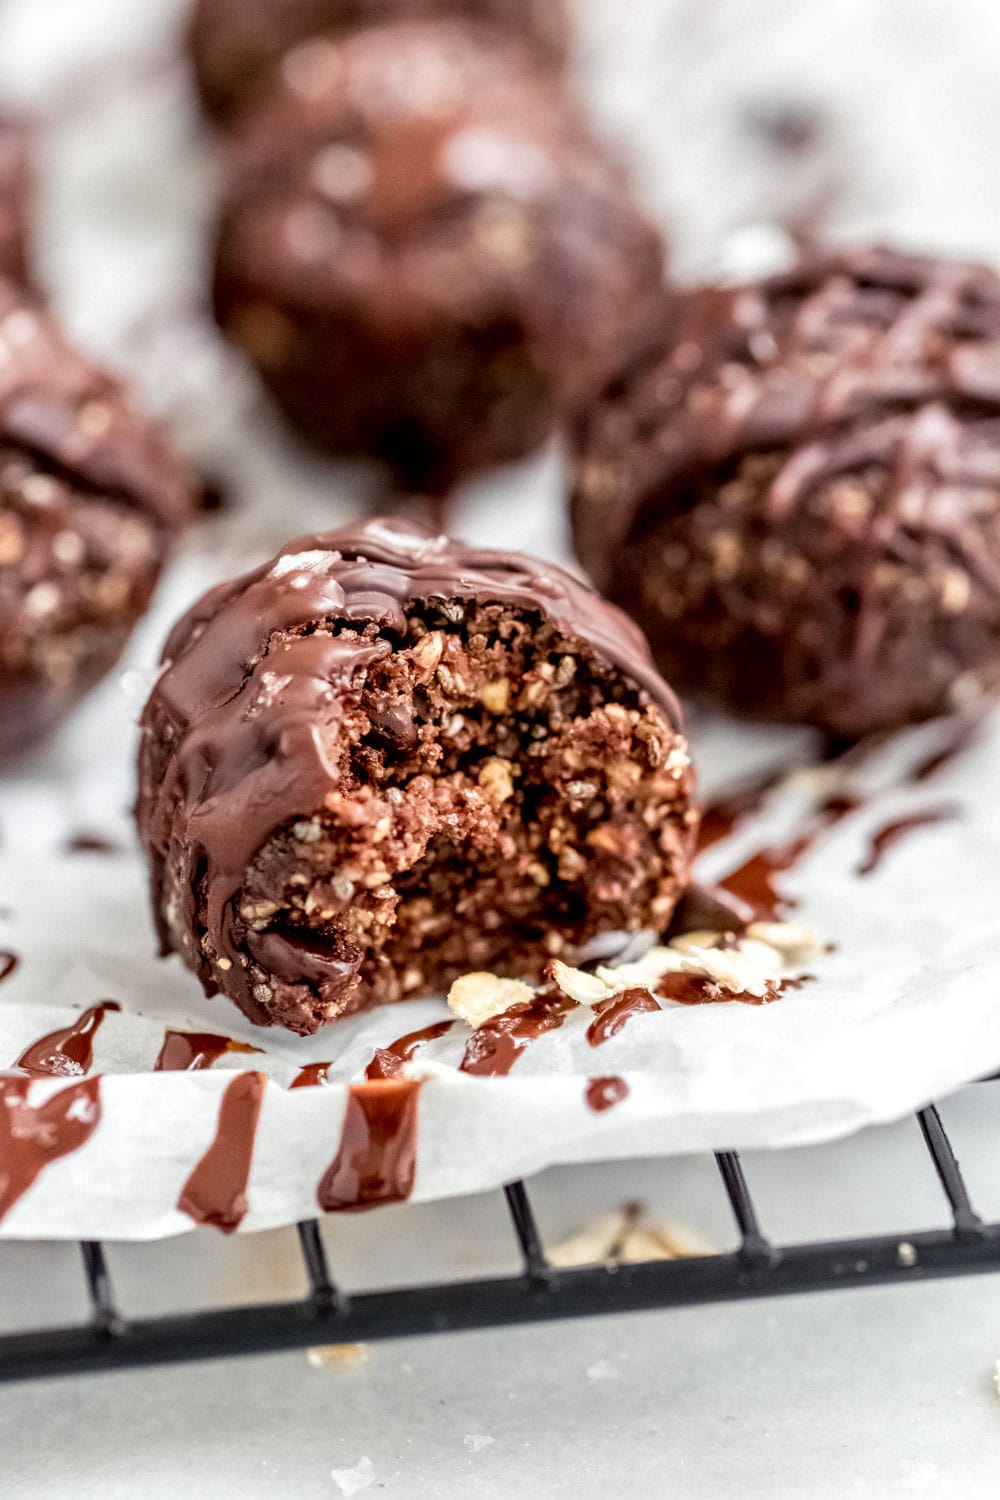 Chocolate bliss balls with chocolate drizzle on top.